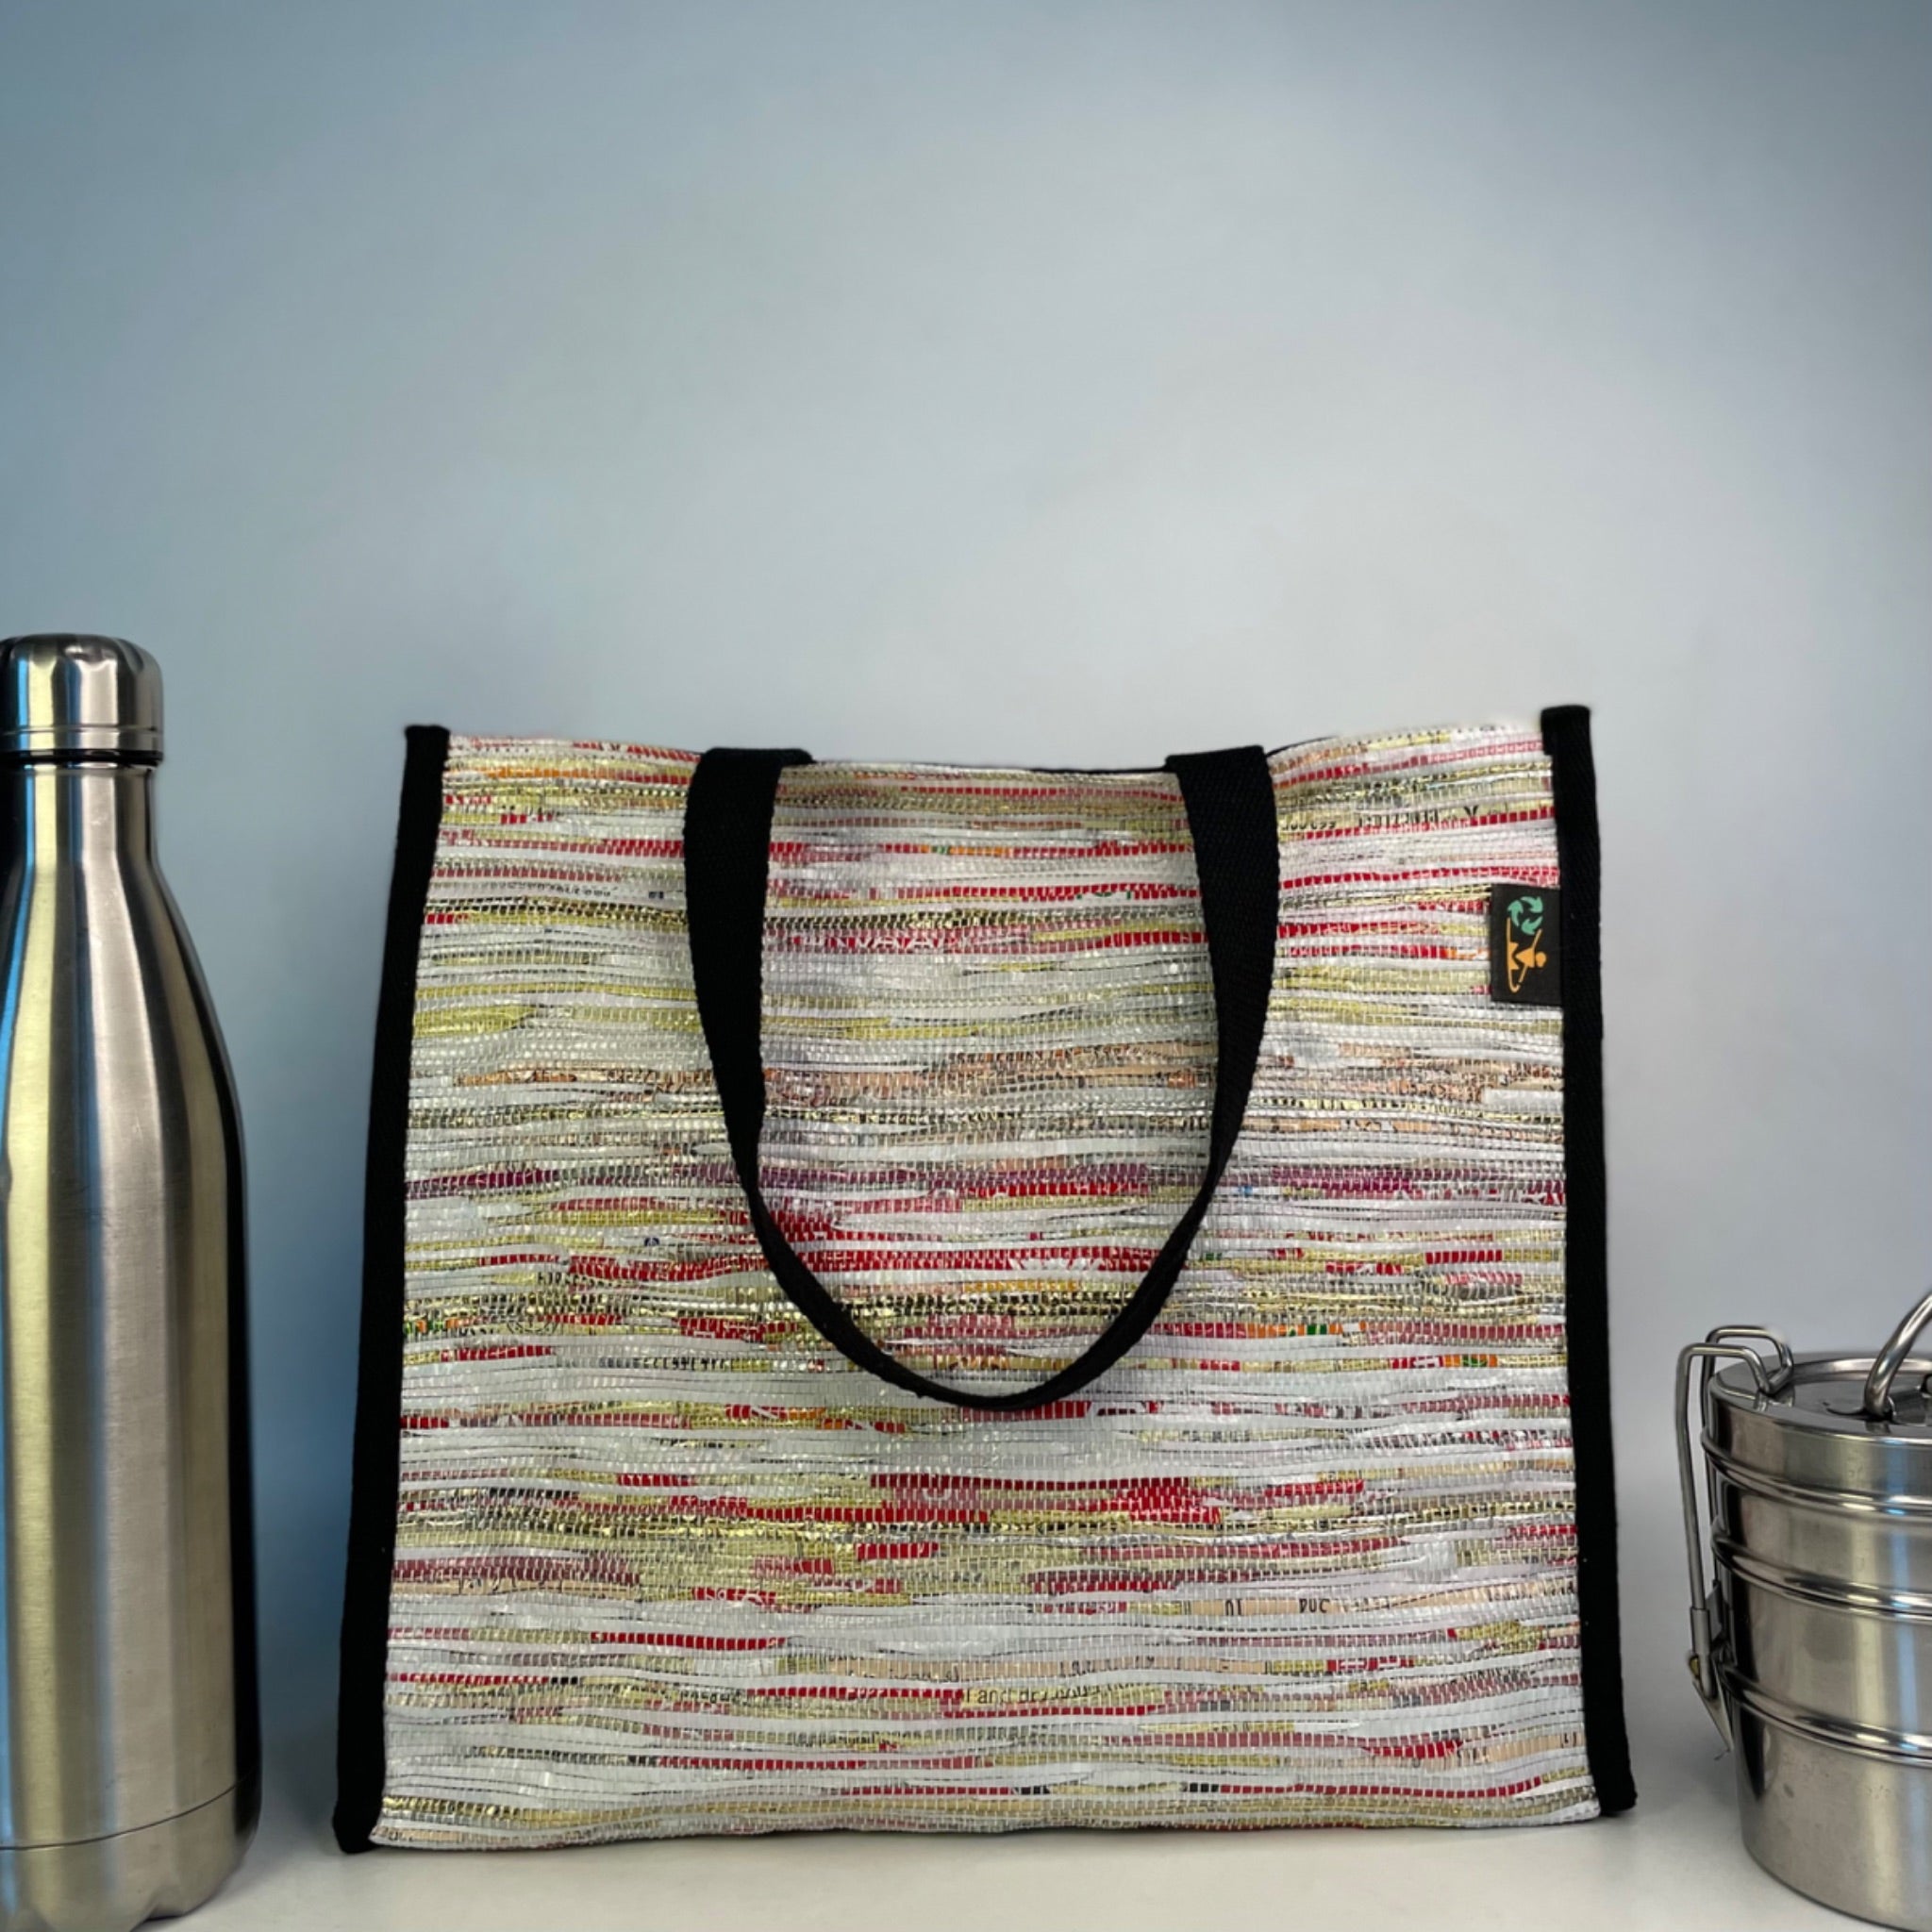 reCharkha Upcycled Handwoven Recycle Livelihoods Handcraft Handmade Lunch Bag Ethically Tribal Made in India Pune Warli Tribe Handloom Refash Trash Fash Waste EcoSocial Upcyclers Conscious Fashion Upcycled slow Trending Swadeshi Weave Textile Sustainable